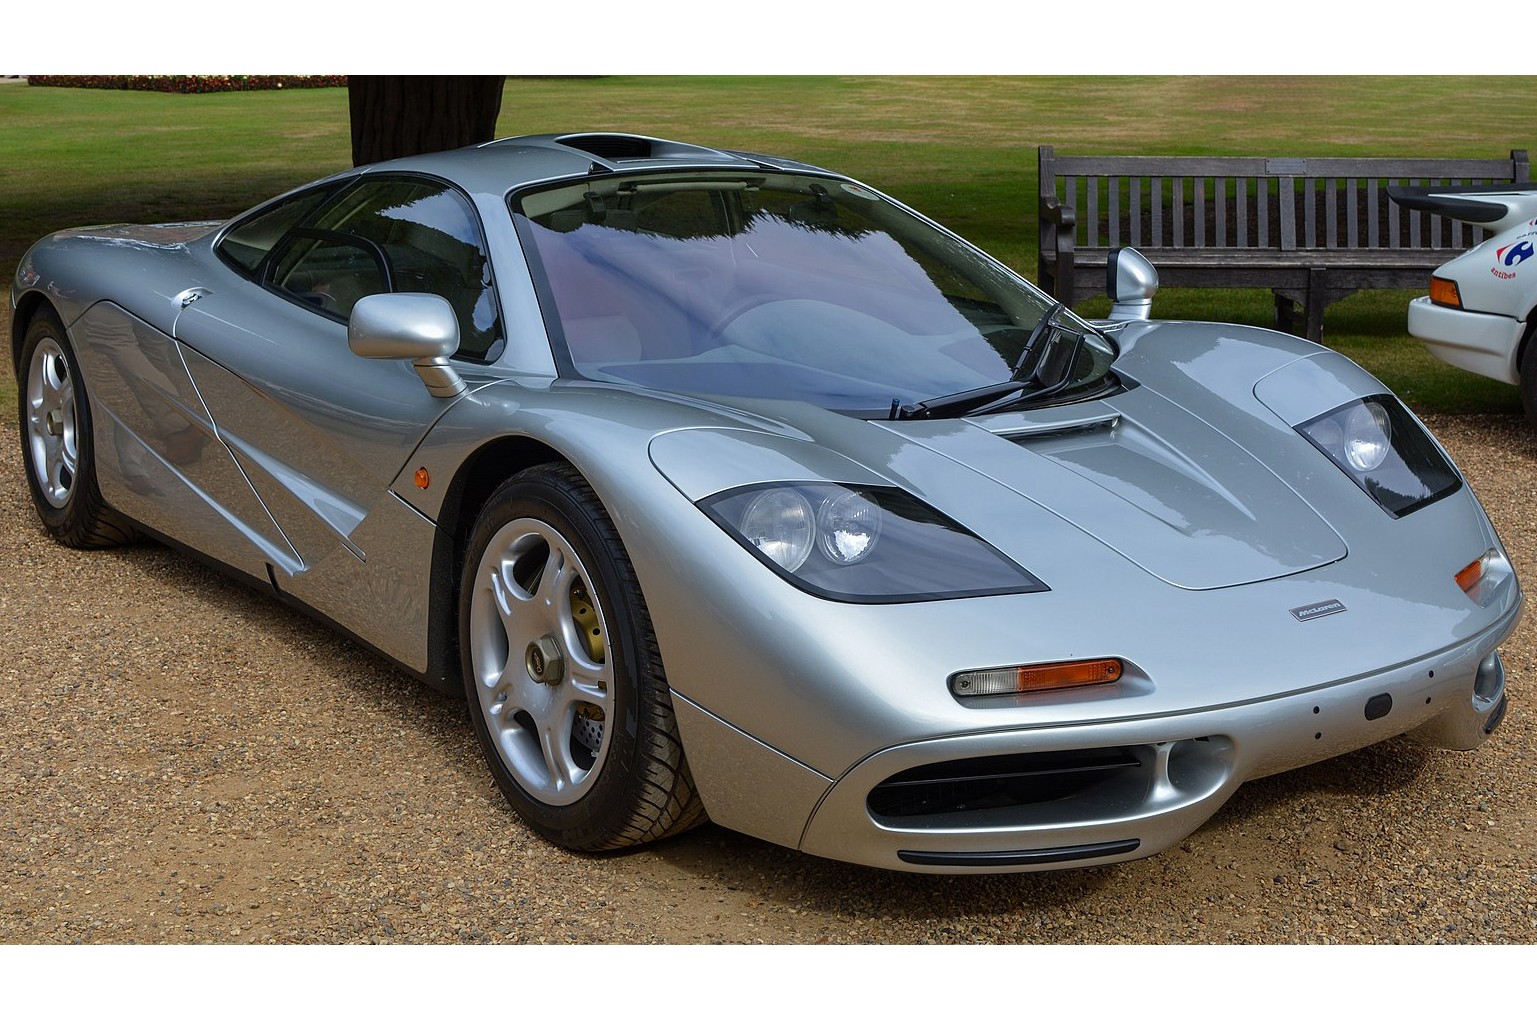 A Replacement McLaren F1 Windshield Costs More than a New Mazda Miata